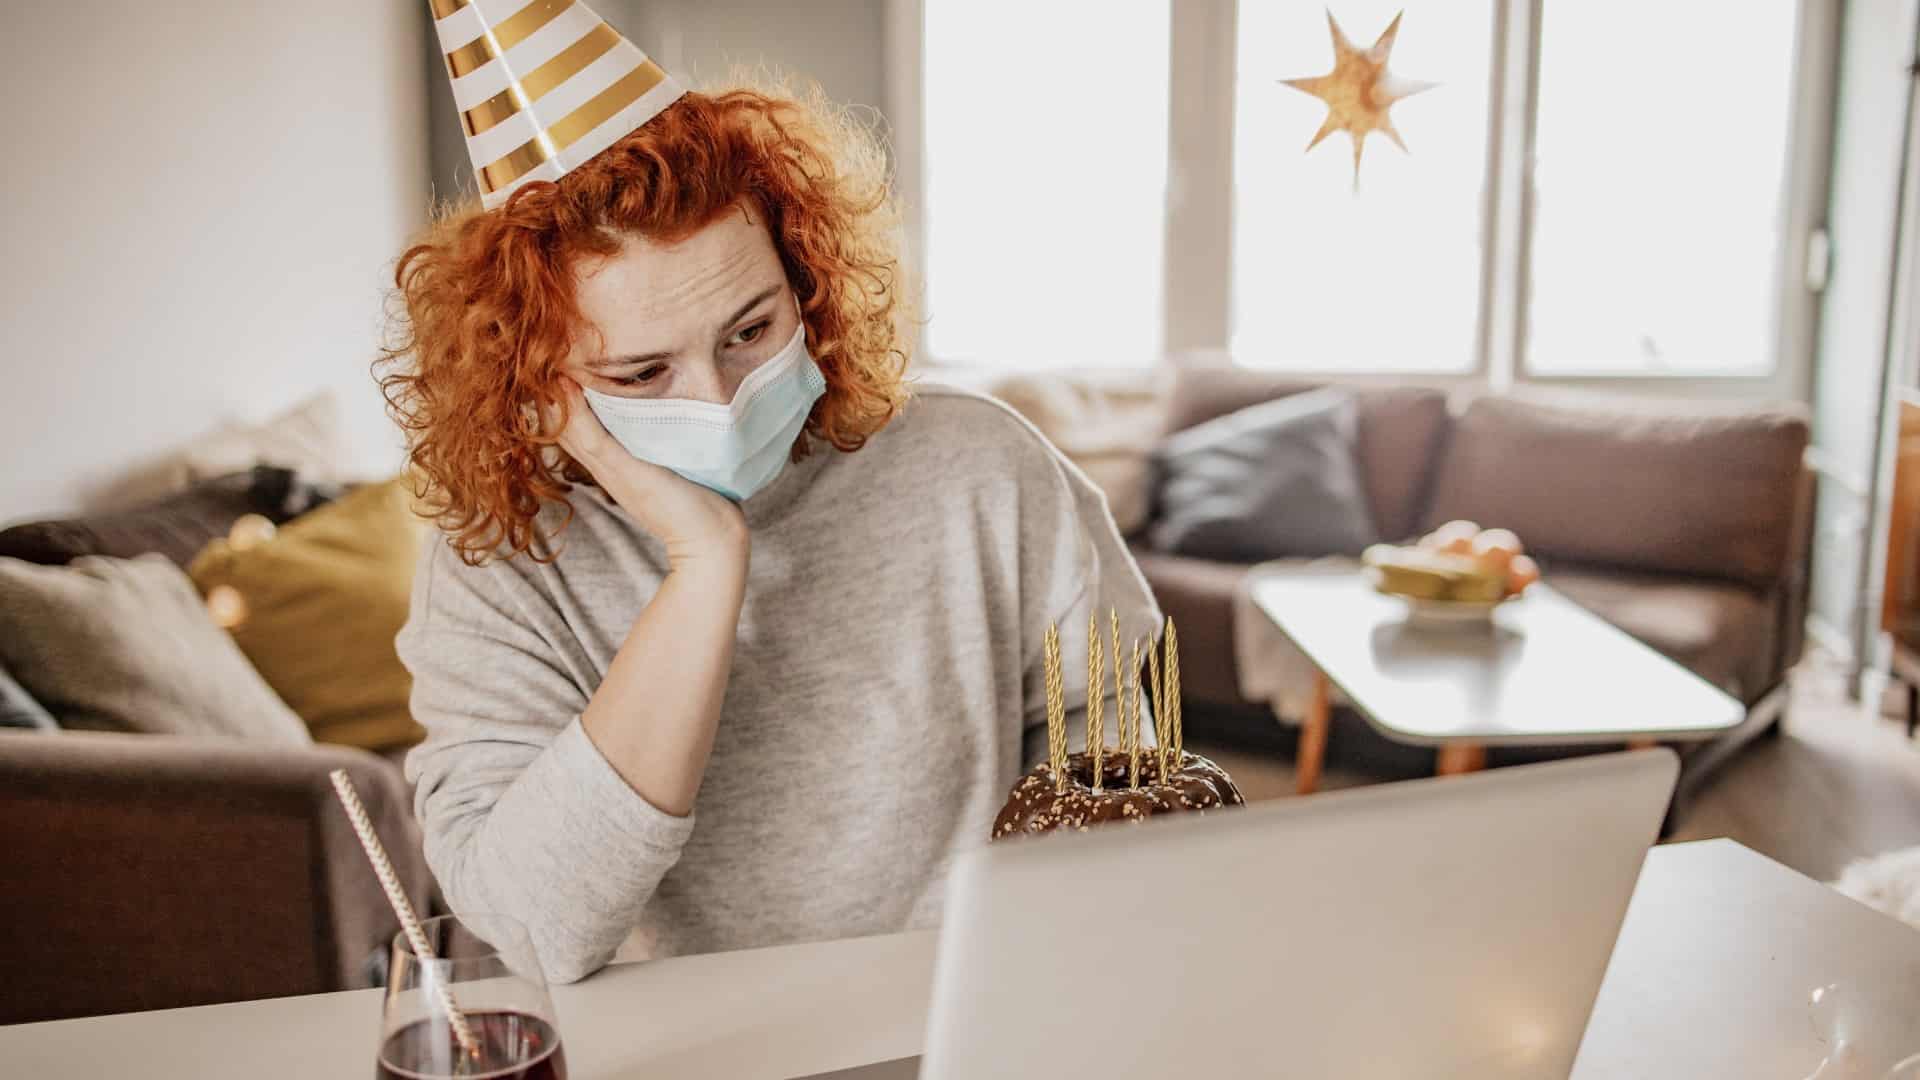 An investor sits at a table in front of her laptop with a party hat on her head and a cake next to her symbolising new year's eve but the 4DS Memory share price is plunging so she looks very disappointed and depressed